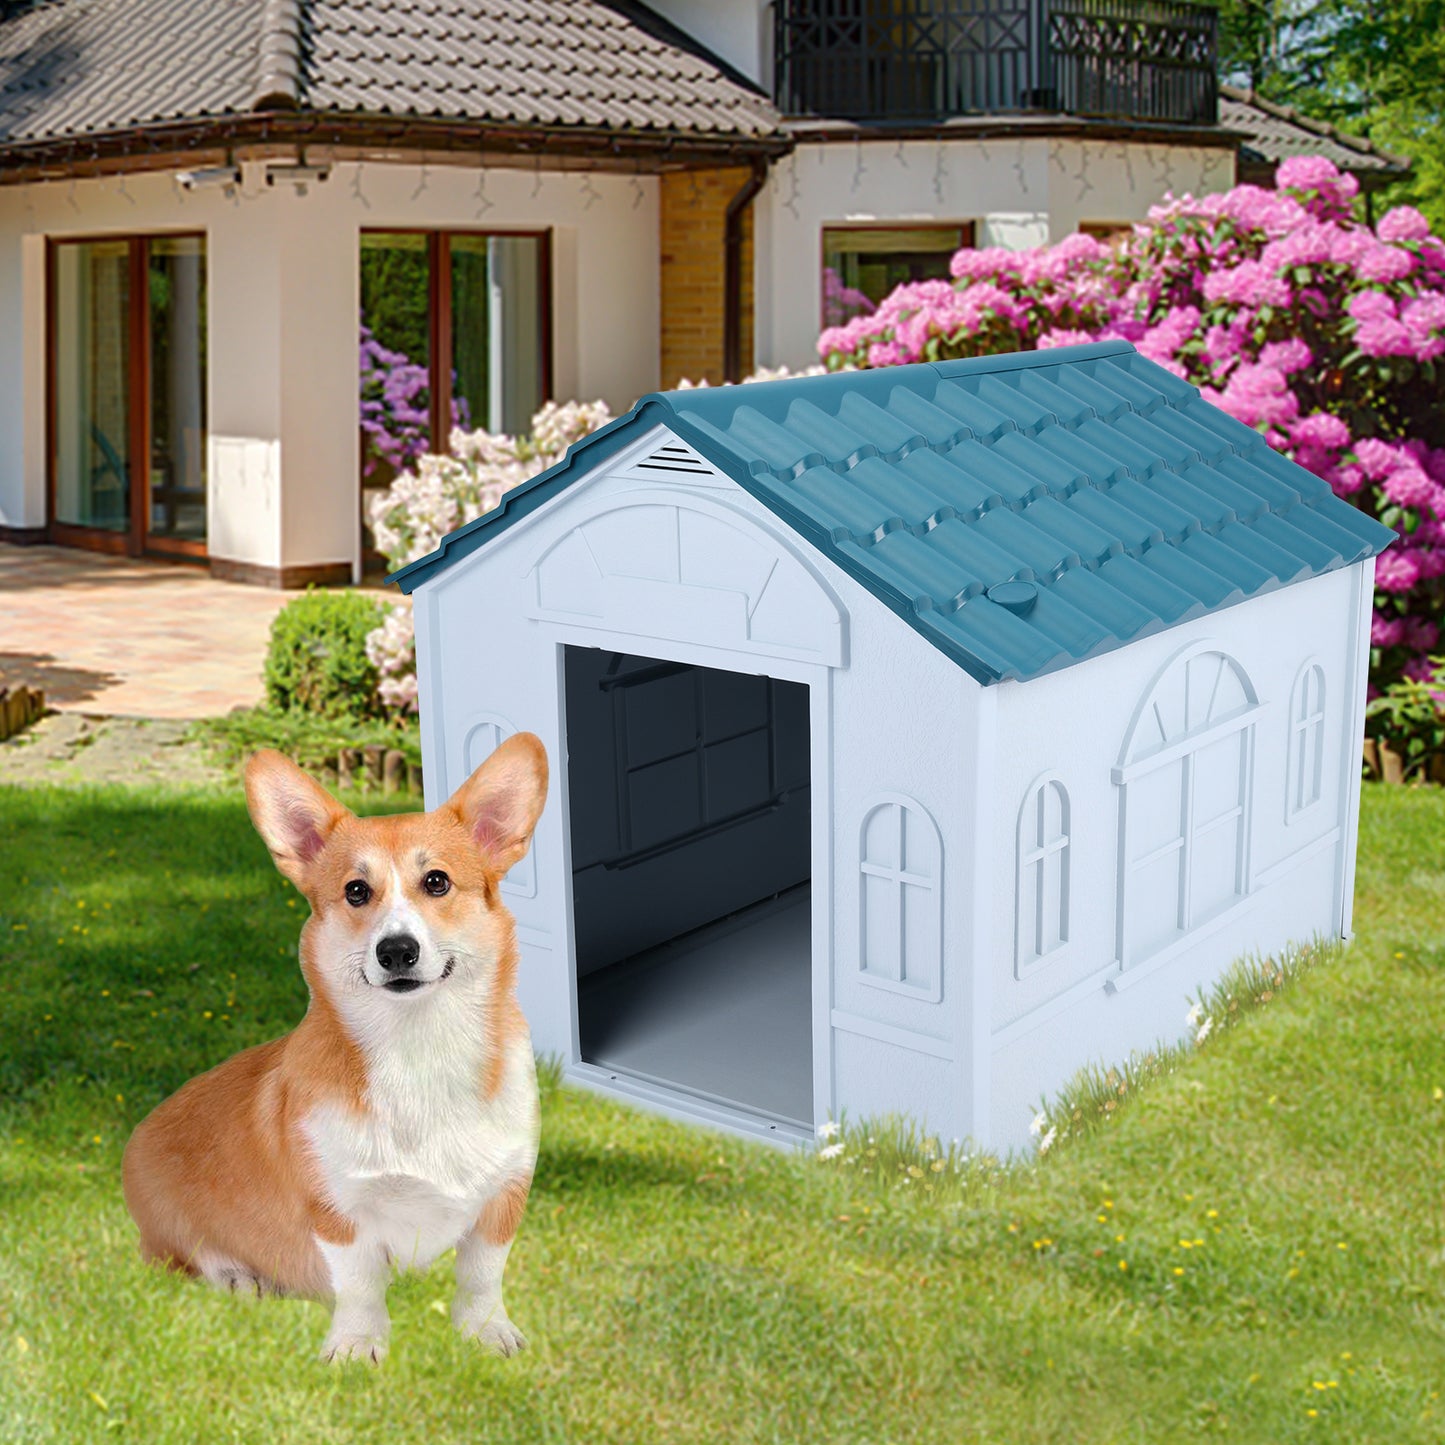 Plastic Dog House Weather Resistant Dog Kennel Puppy Shelter Indoor Outdoor Doghouse